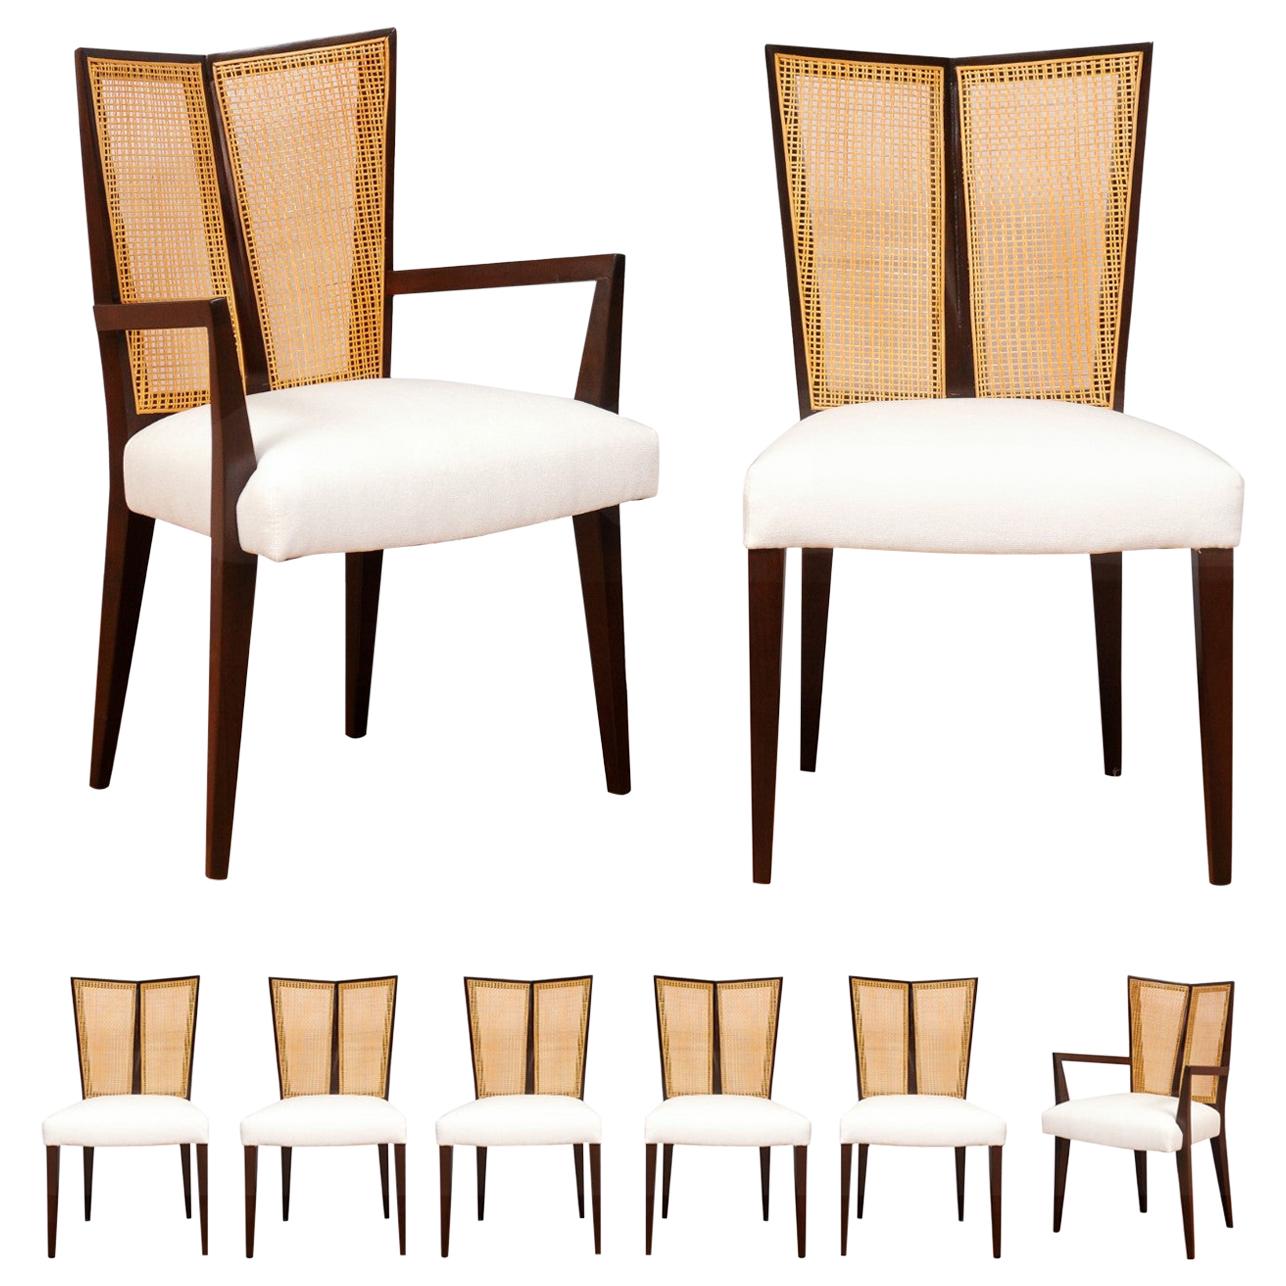 Breathtaking Set of 8 Modern V-Back Cane Chairs by Michael Taylor, circa 1960 For Sale